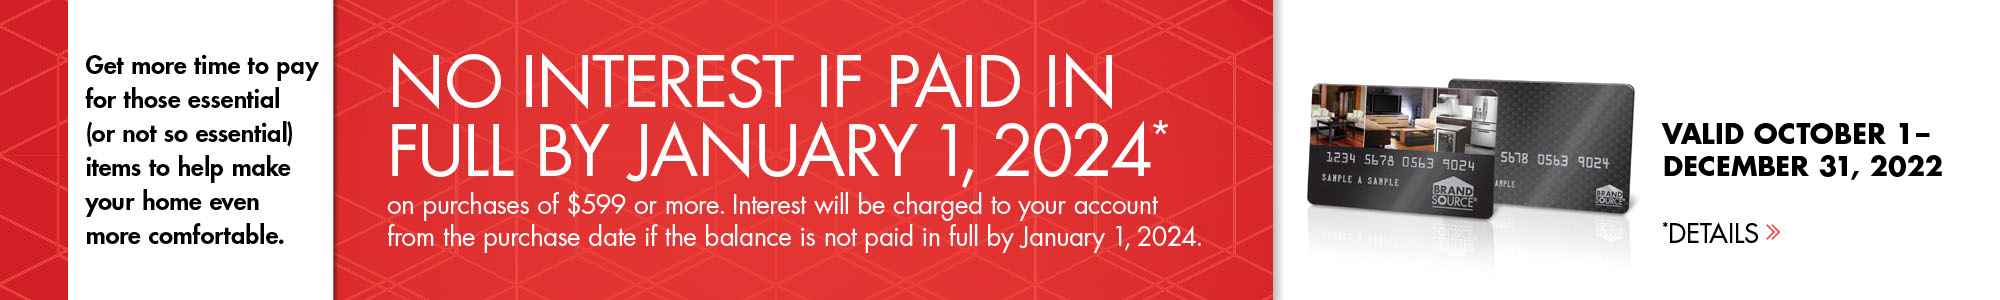 Brandsource Citi - No interest if paid in full by January 1, 2024